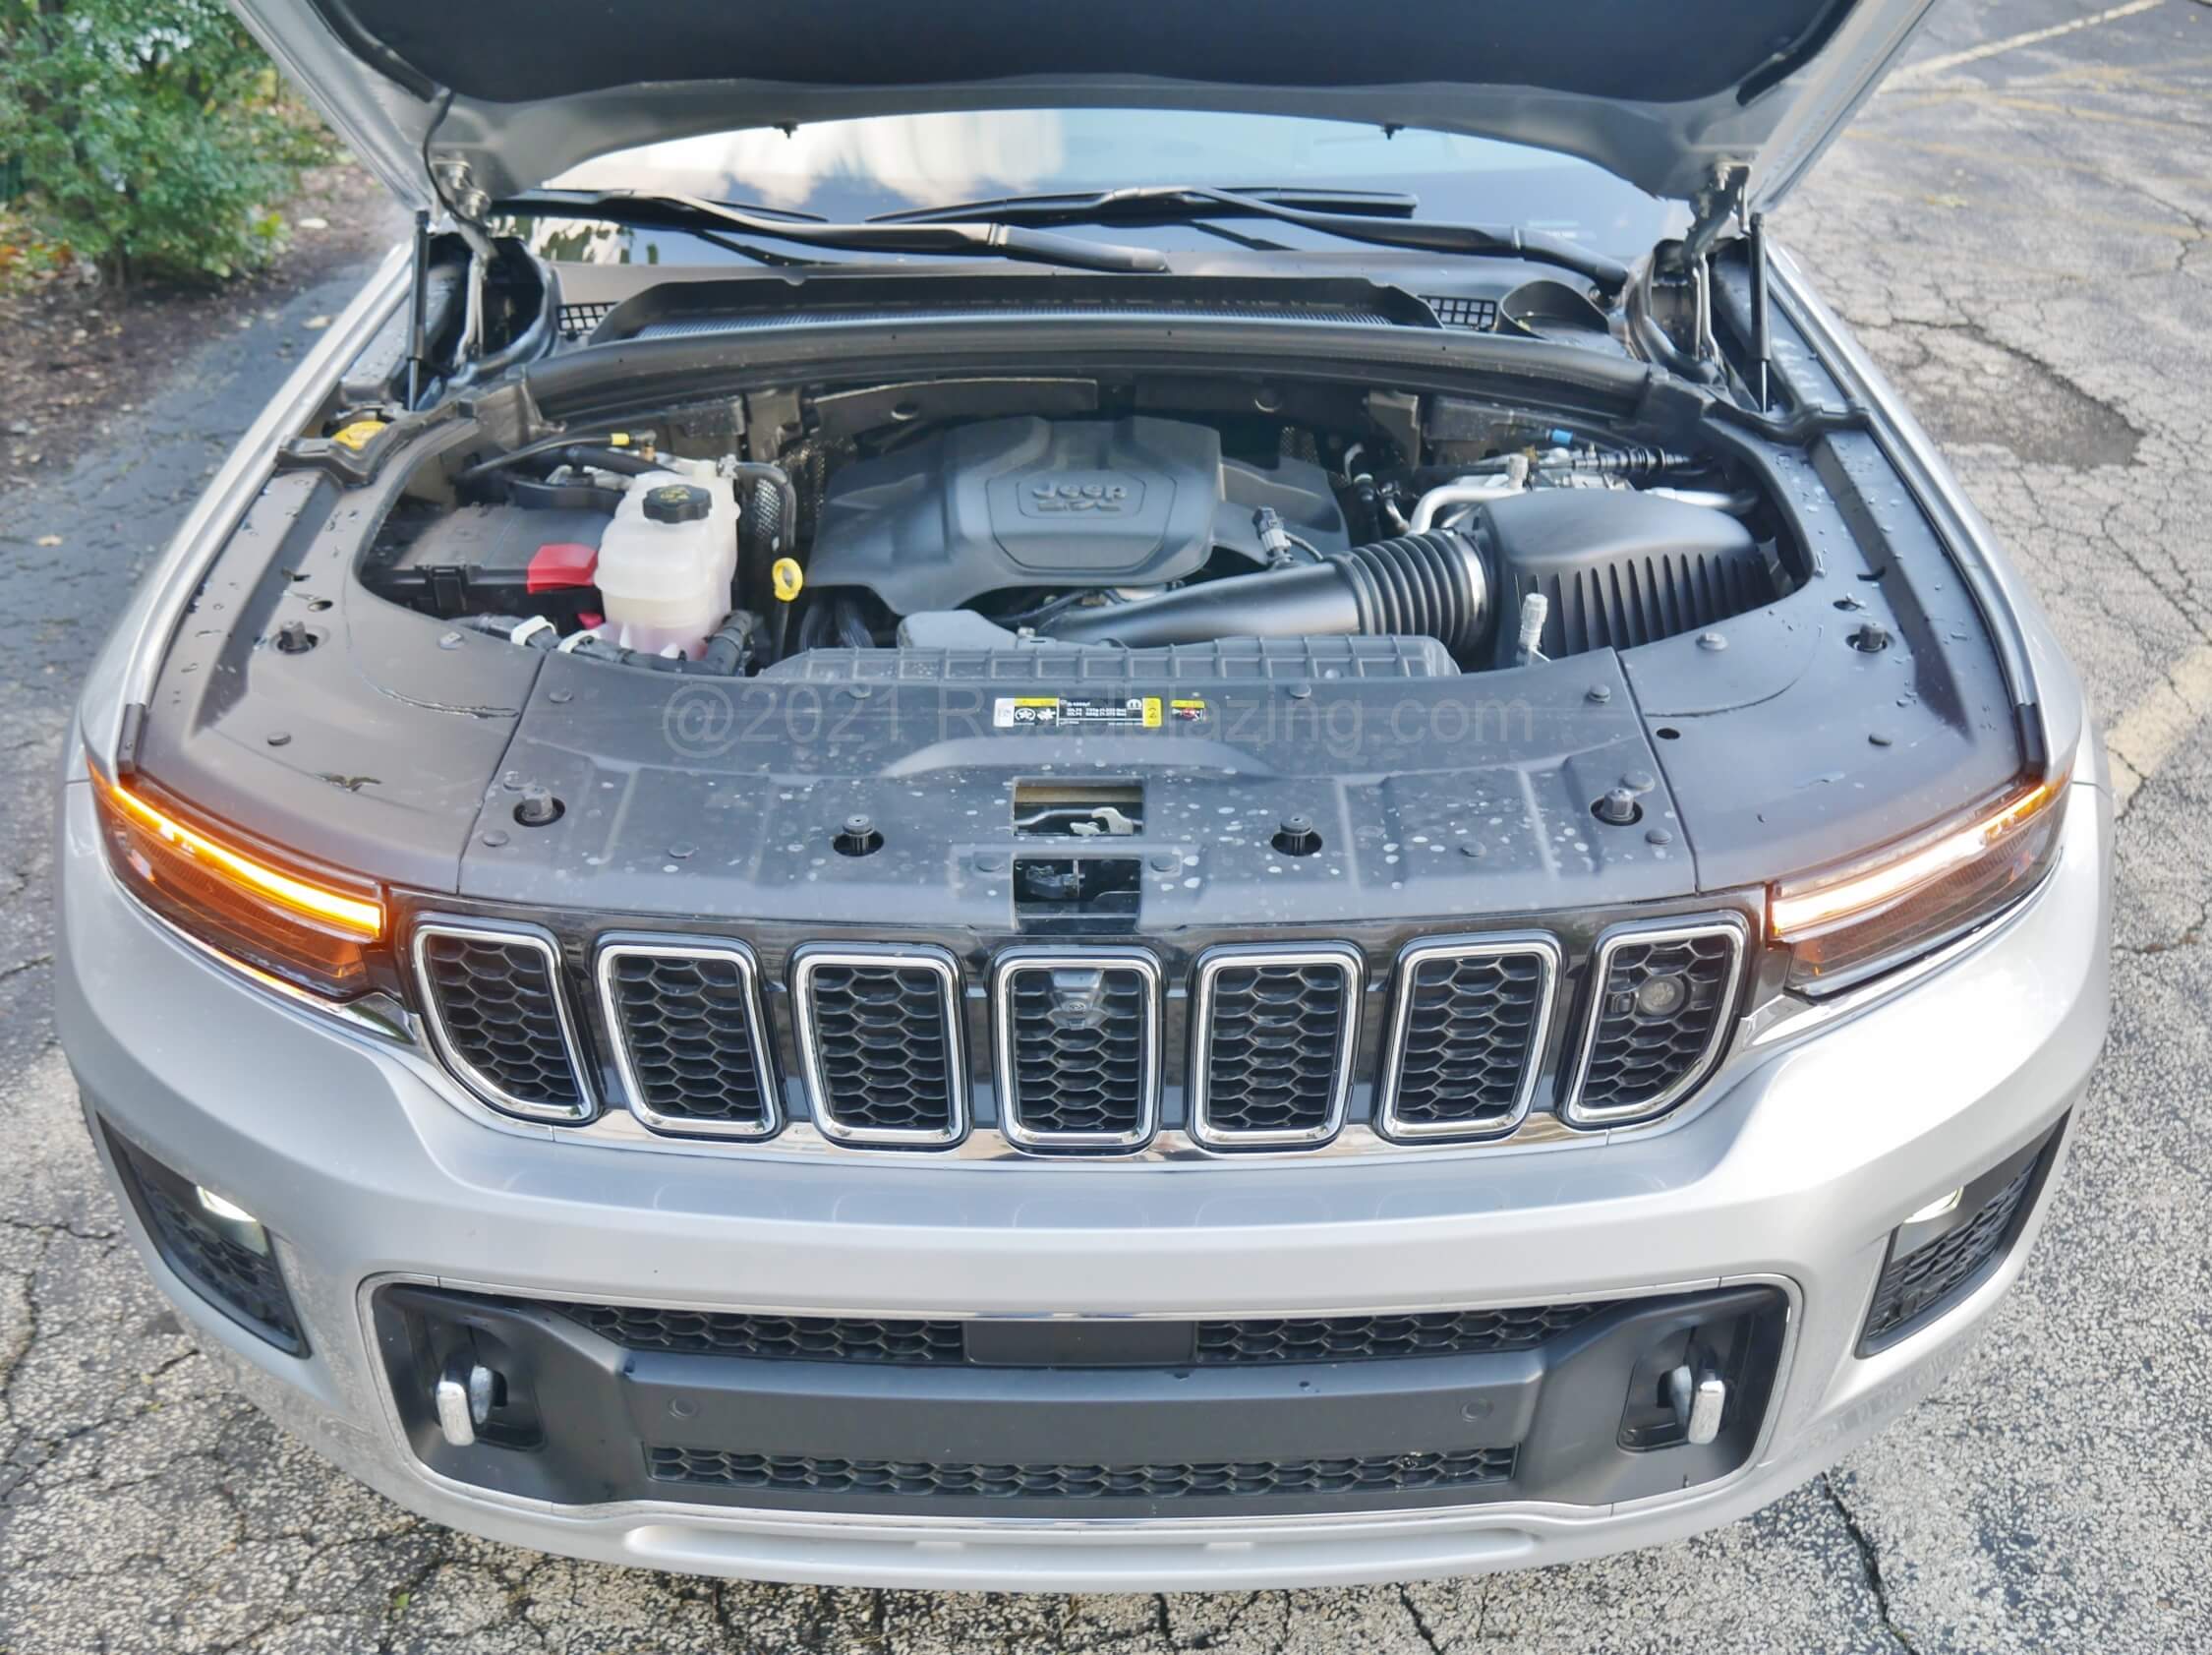 2021 Jeep Grand Cherokee L Overland 5.7L 4x4: optional small-block OHV gas-V-8 + 8-spd. ZF automatic transmission + Quadra Drive II make for briskness, greater towing & Trail Rating but gulp at 15 MPG